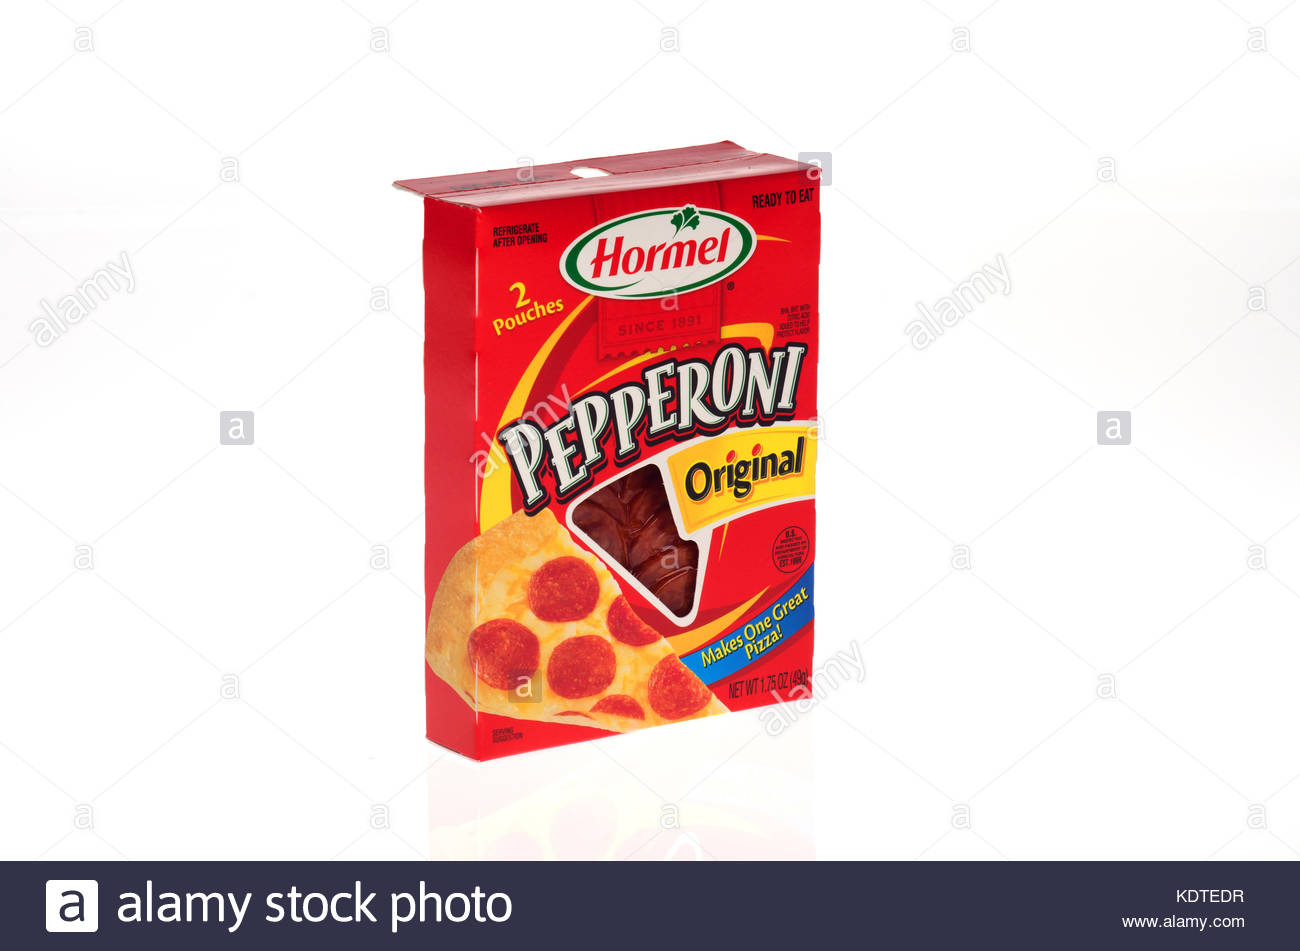 Package Of The Original Hormel Pepperoni On White Background